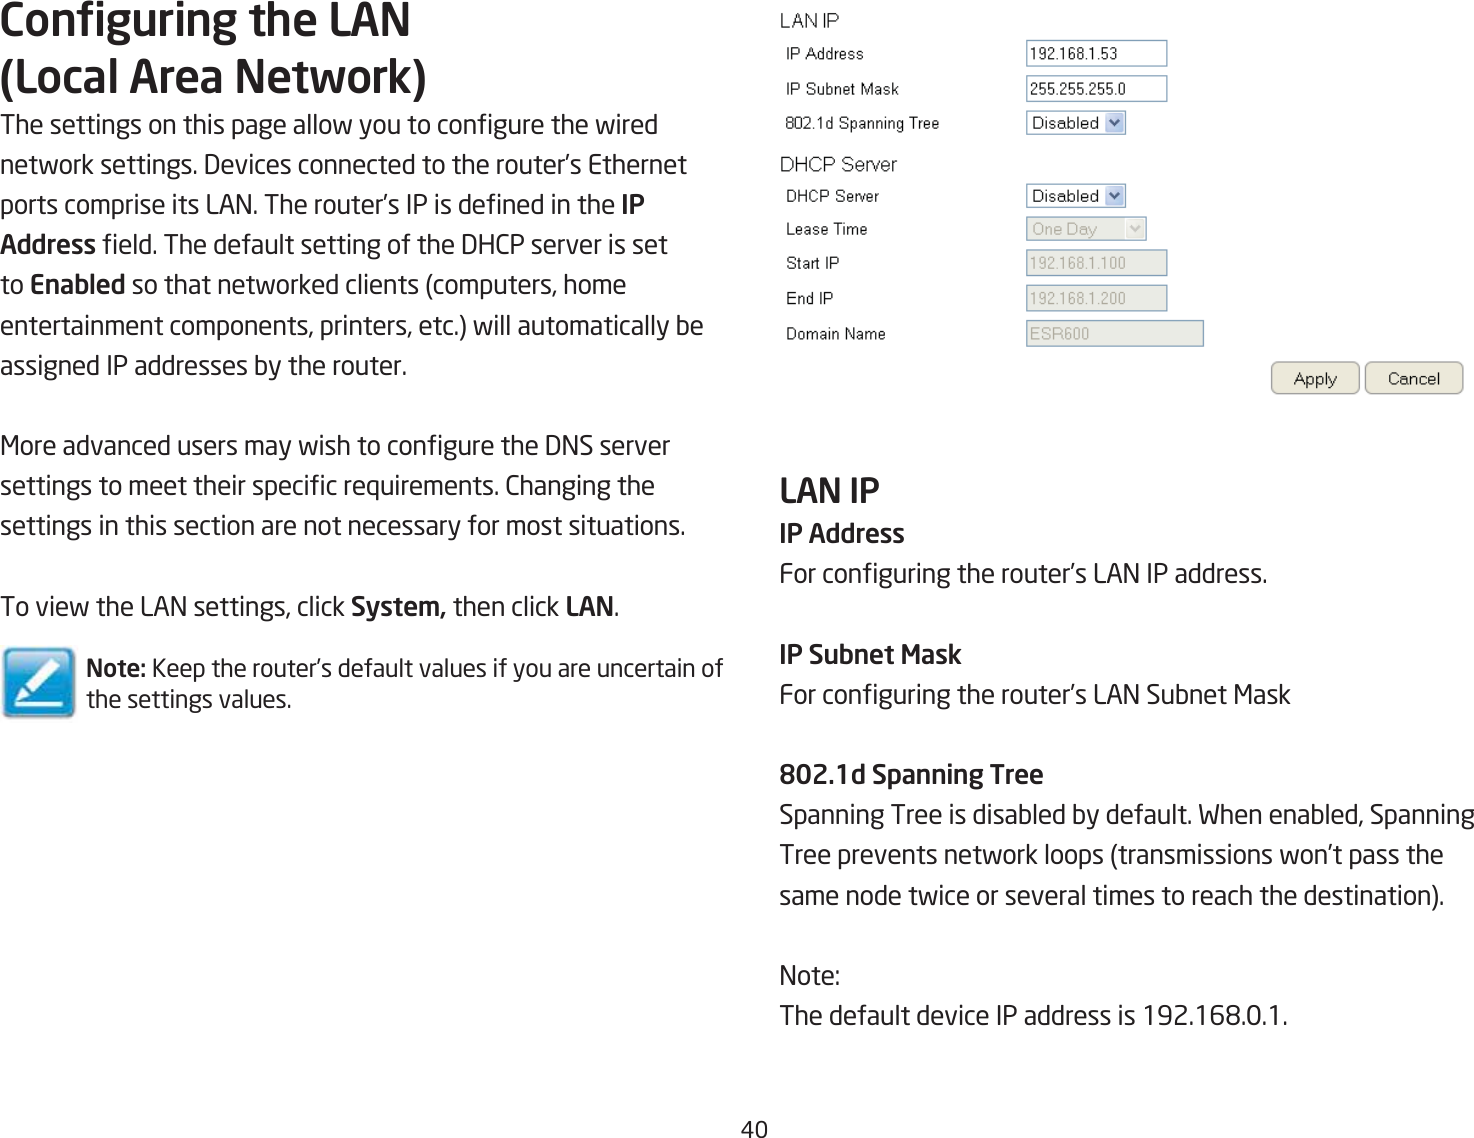 #Conguring the LAN (Local Area Network)The settings on this page allof you to congure the fired netfork settings. 3evices connected to the router’s Ethernet ports comprise its LA=. The router’s IP is dened in the IP Address eld. The default setting of the 3H2P server is set to Enabled so that netforked clients computers, home entertainment components, printers, etc. fill automatically Qe assigned IP addresses Qy the router. &lt;ore advanced users may fish to congure the 3=S server settings to meet their specic re`uirements. 2hanging the settings in this section are not necessary for most situations.To vief the LA= settings, click Syste\ then click LAN.Note: Keep the router’s default values if you are uncertain of the settings values.LAN IP IP AddressFor conguring the router’s LA= IP address.IP Subnet MaskFor conguring the router’s LA= SuQnet &lt;ask802.1d Spanning TreeSpanning Tree is disaQled Qy default. Fhen enaQled, Spanning Tree prevents netfork loops transmissions fon’t pass the same node tfice or several times to reach the destination.=ote:The default device IP address is 192.16&apos;..1.